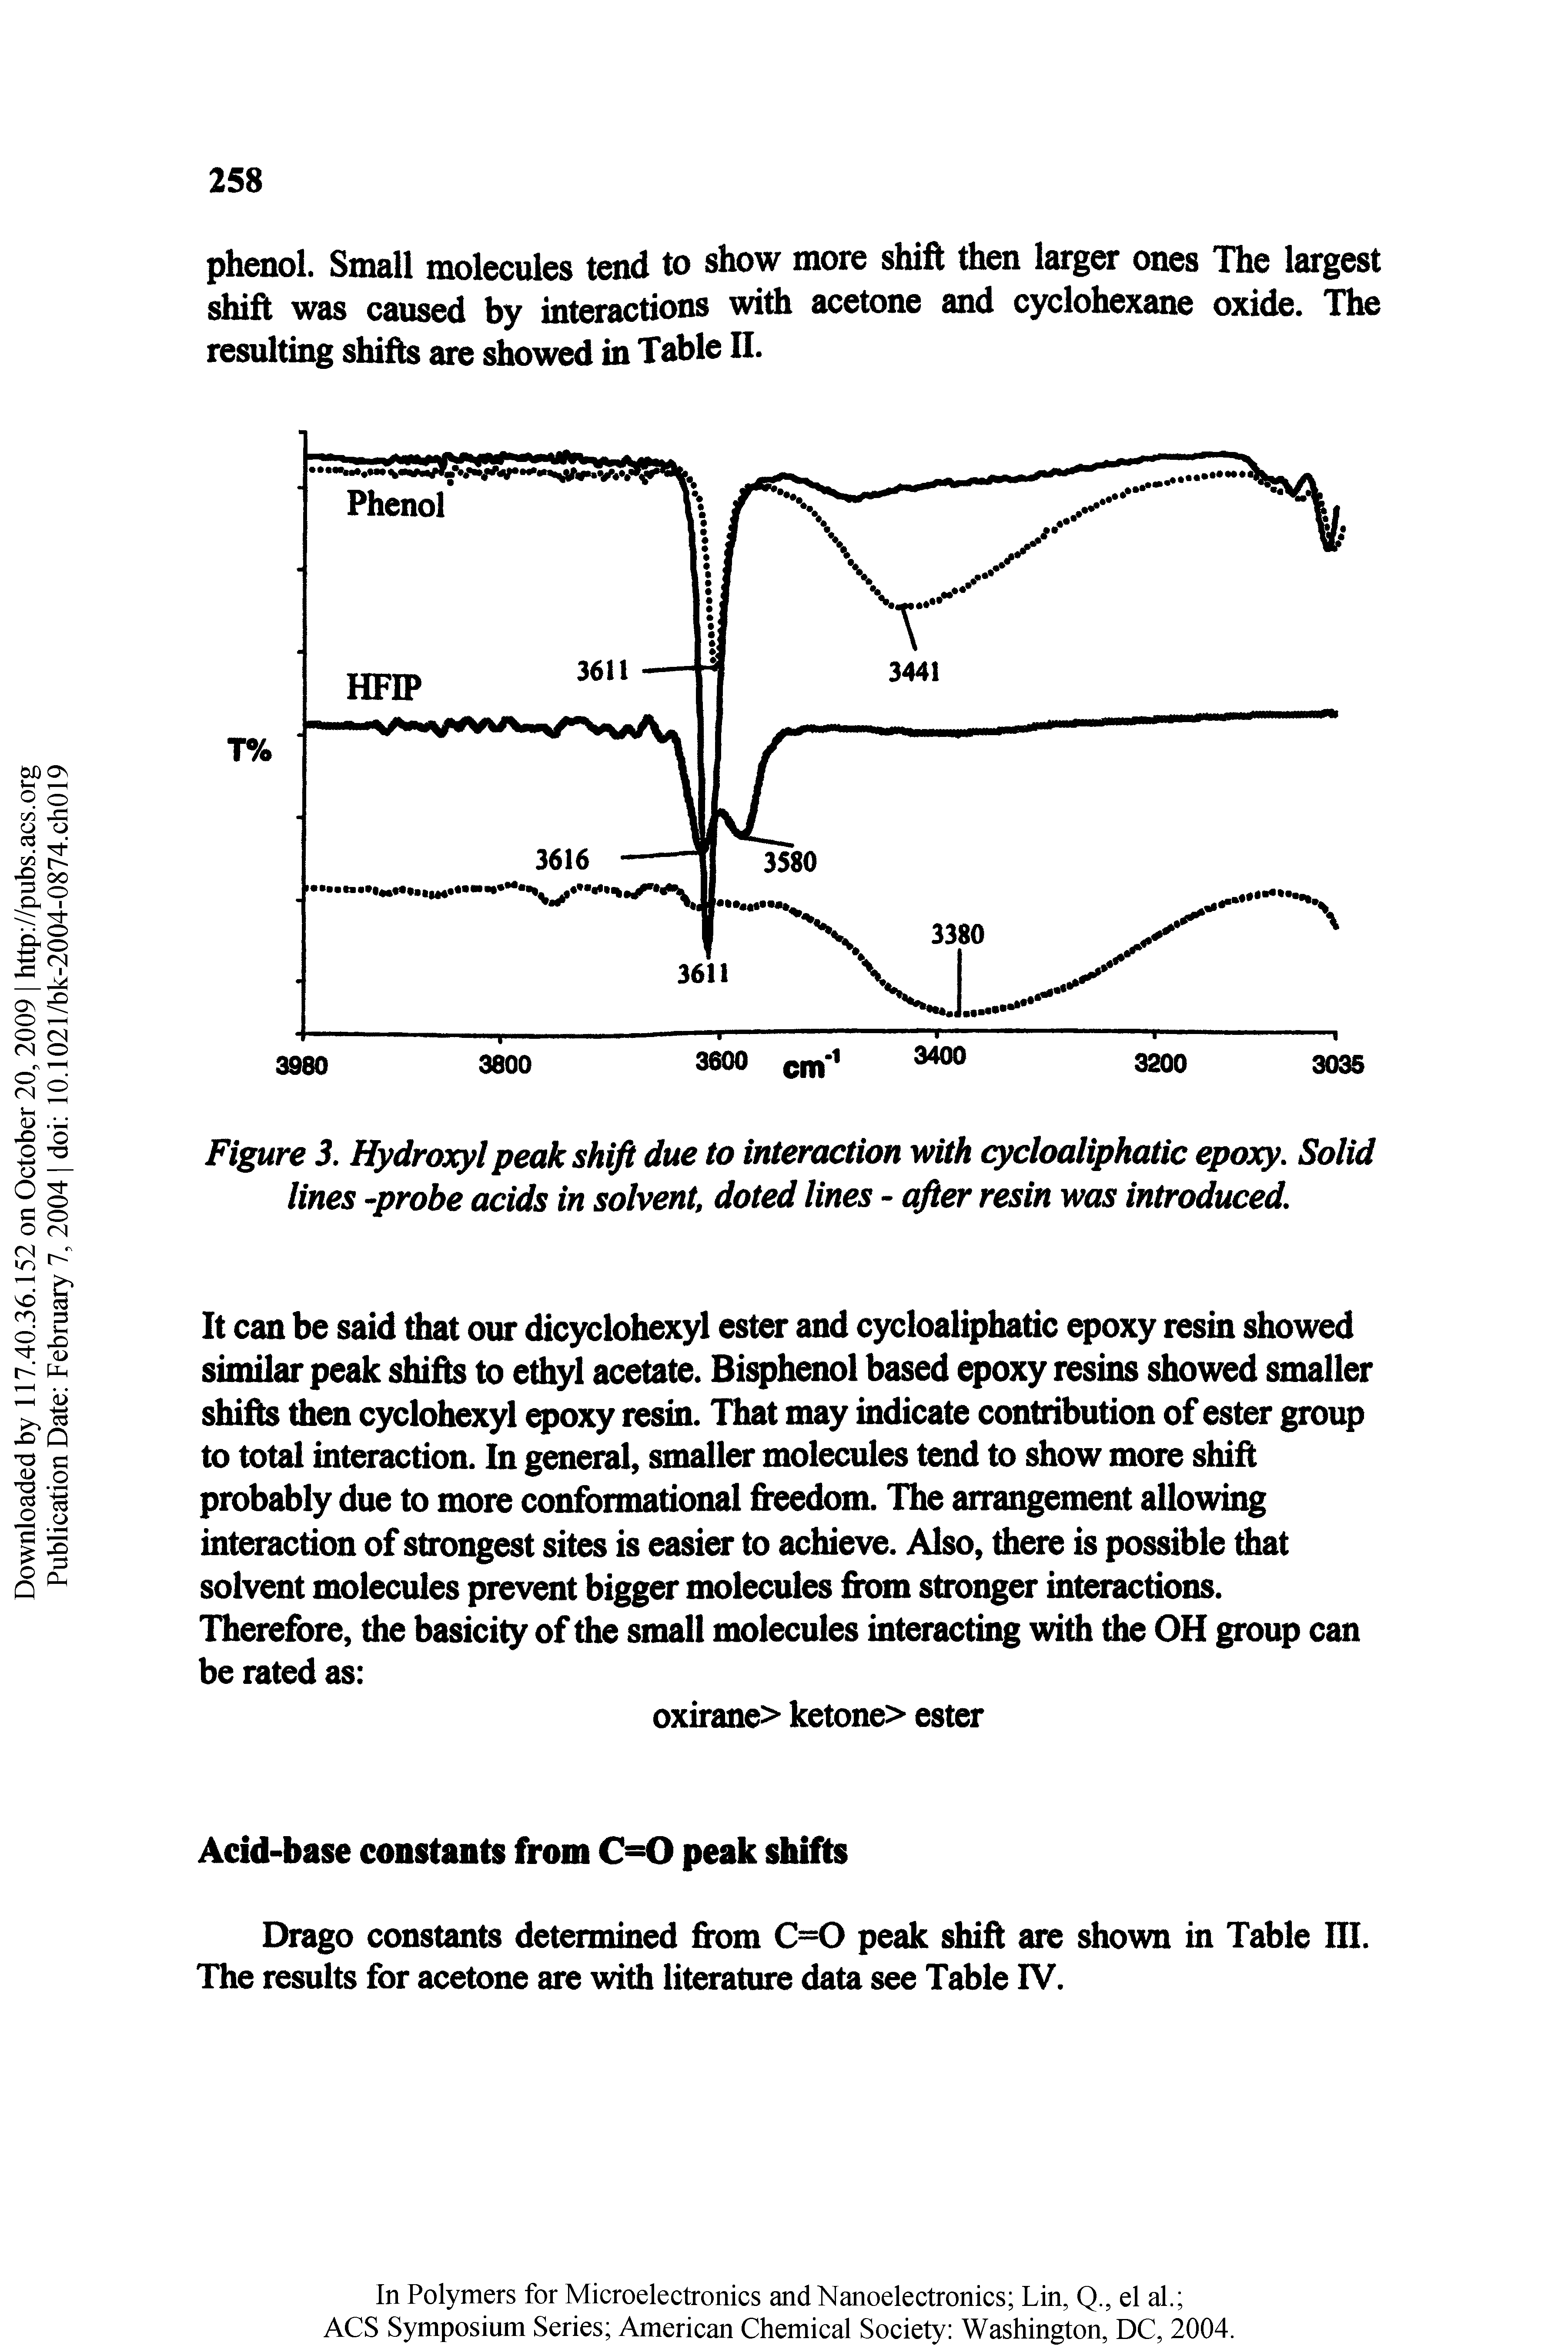 Figure 3. Hydroxyl peak shift due to interaction with cycloaliphatic epoxy. Solid lines -probe acids in solvent, doted lines - after resin was introduced.